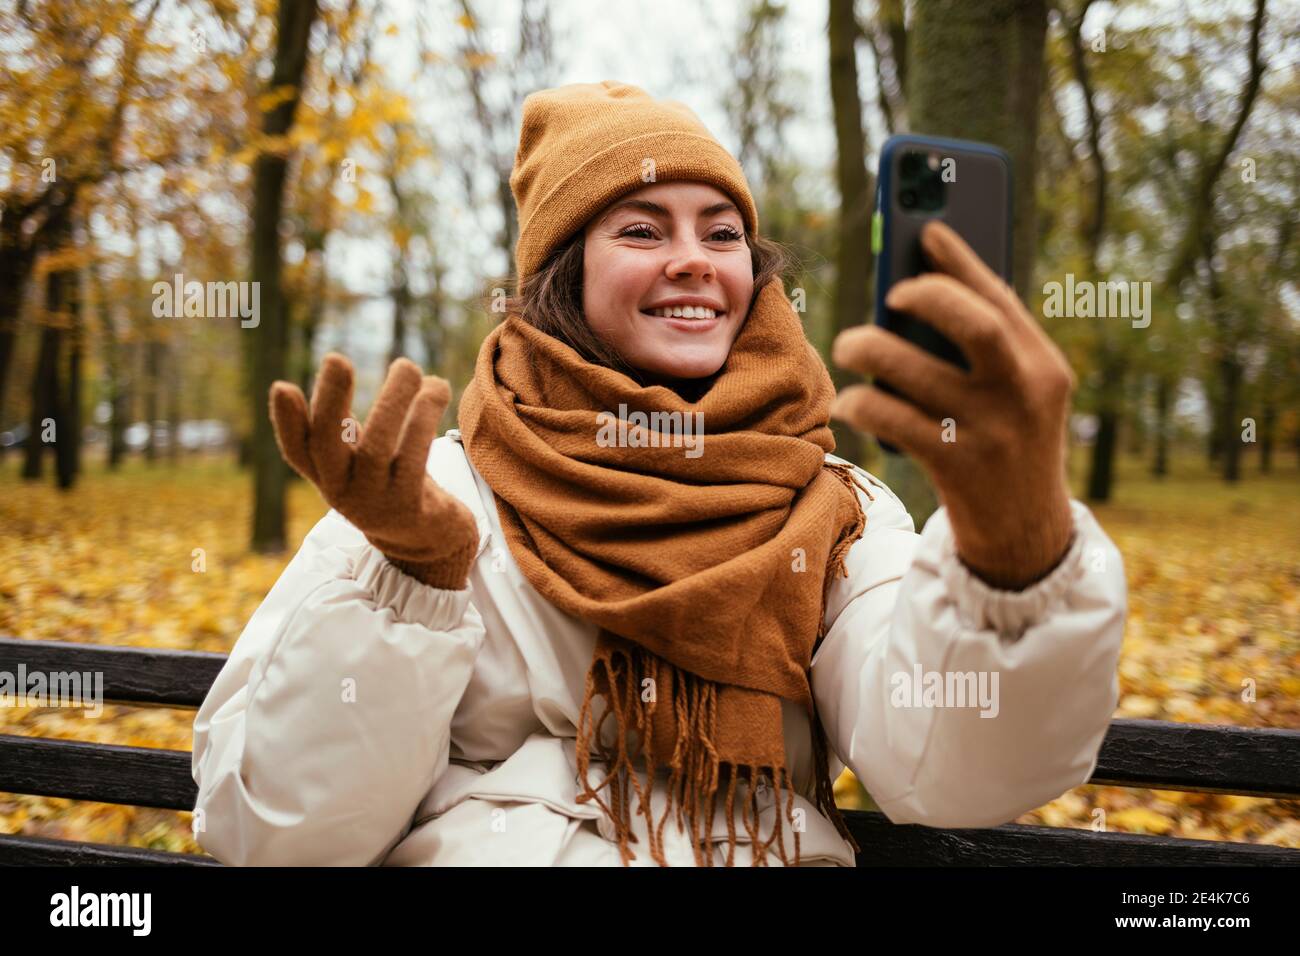 Smiling young woman hand gesturing while talking on video call in autumn park Stock Photo